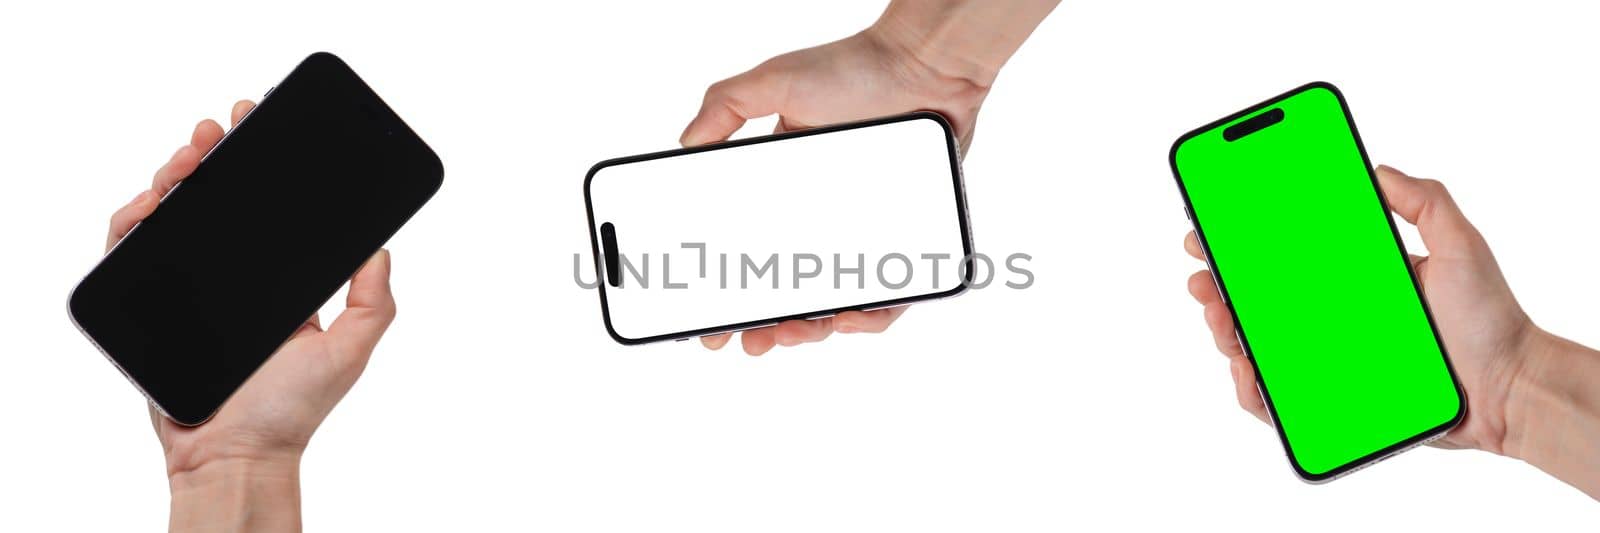 Phone in hand on a white background. A woman's hand holds a new modern phone in her hand on a white background with a blank white screen. Smartphone isolated on green background with green screen